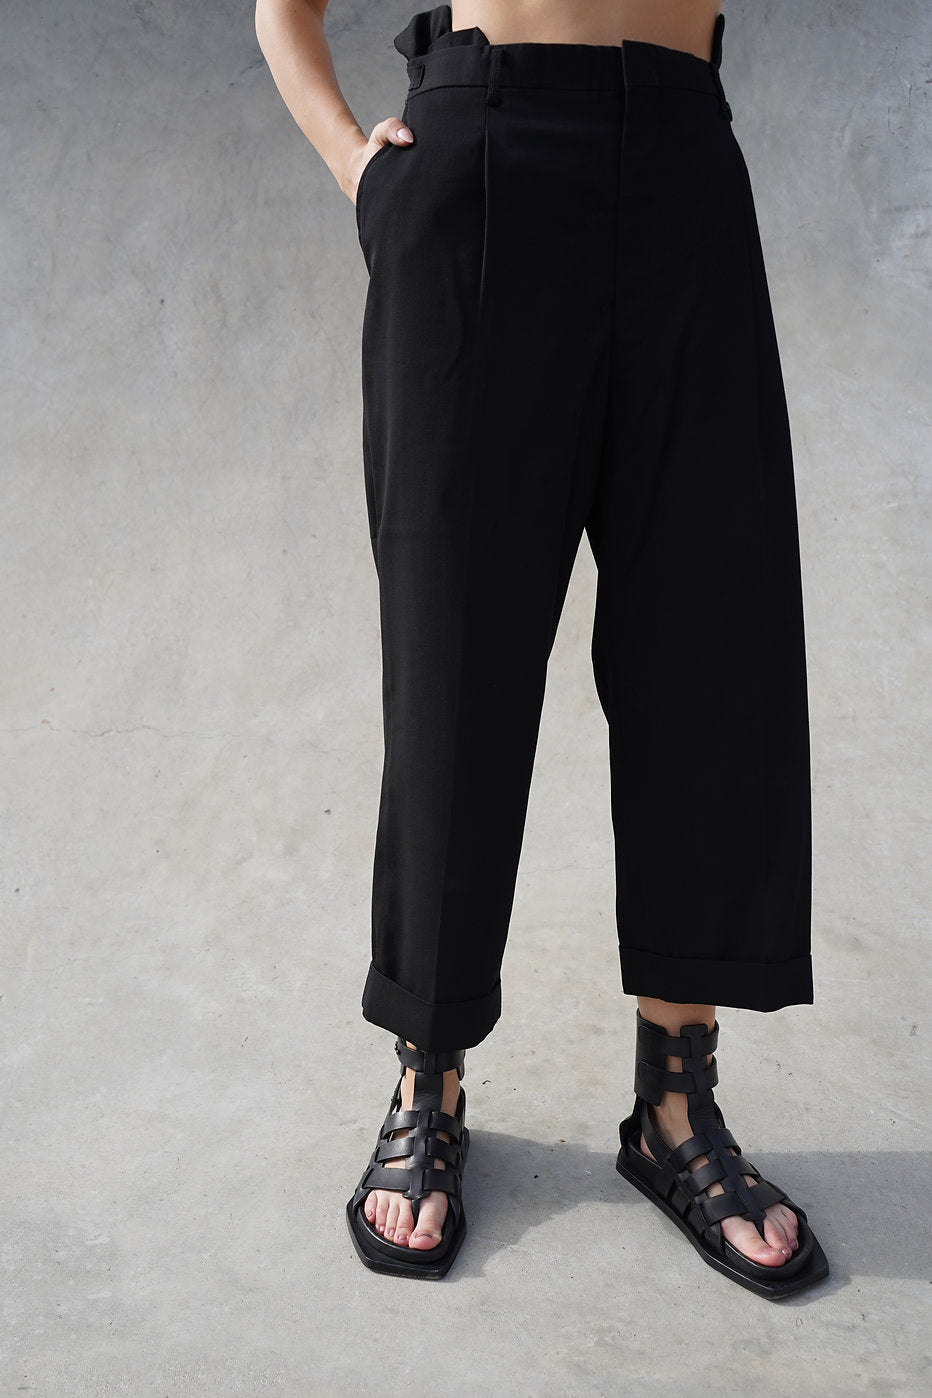 Rear view of the black tapered pants, showcasing the fit and drape of the fabric